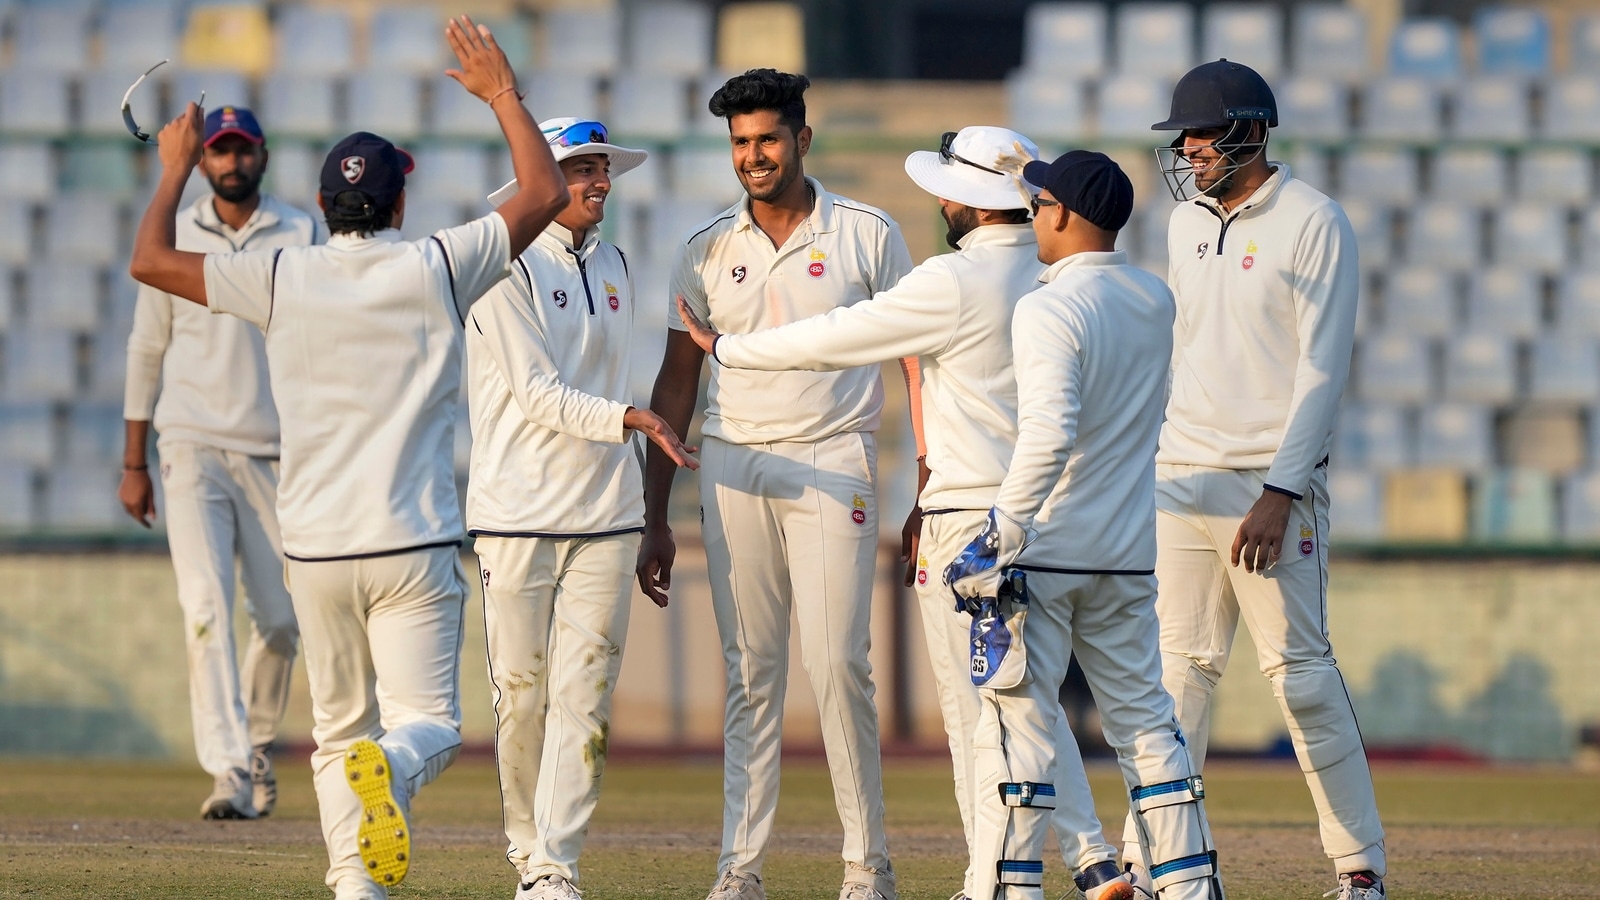 Ranji Trophy Young pacer Harshit Rana leads Delhis fight vs Tamil Nadu Cricket